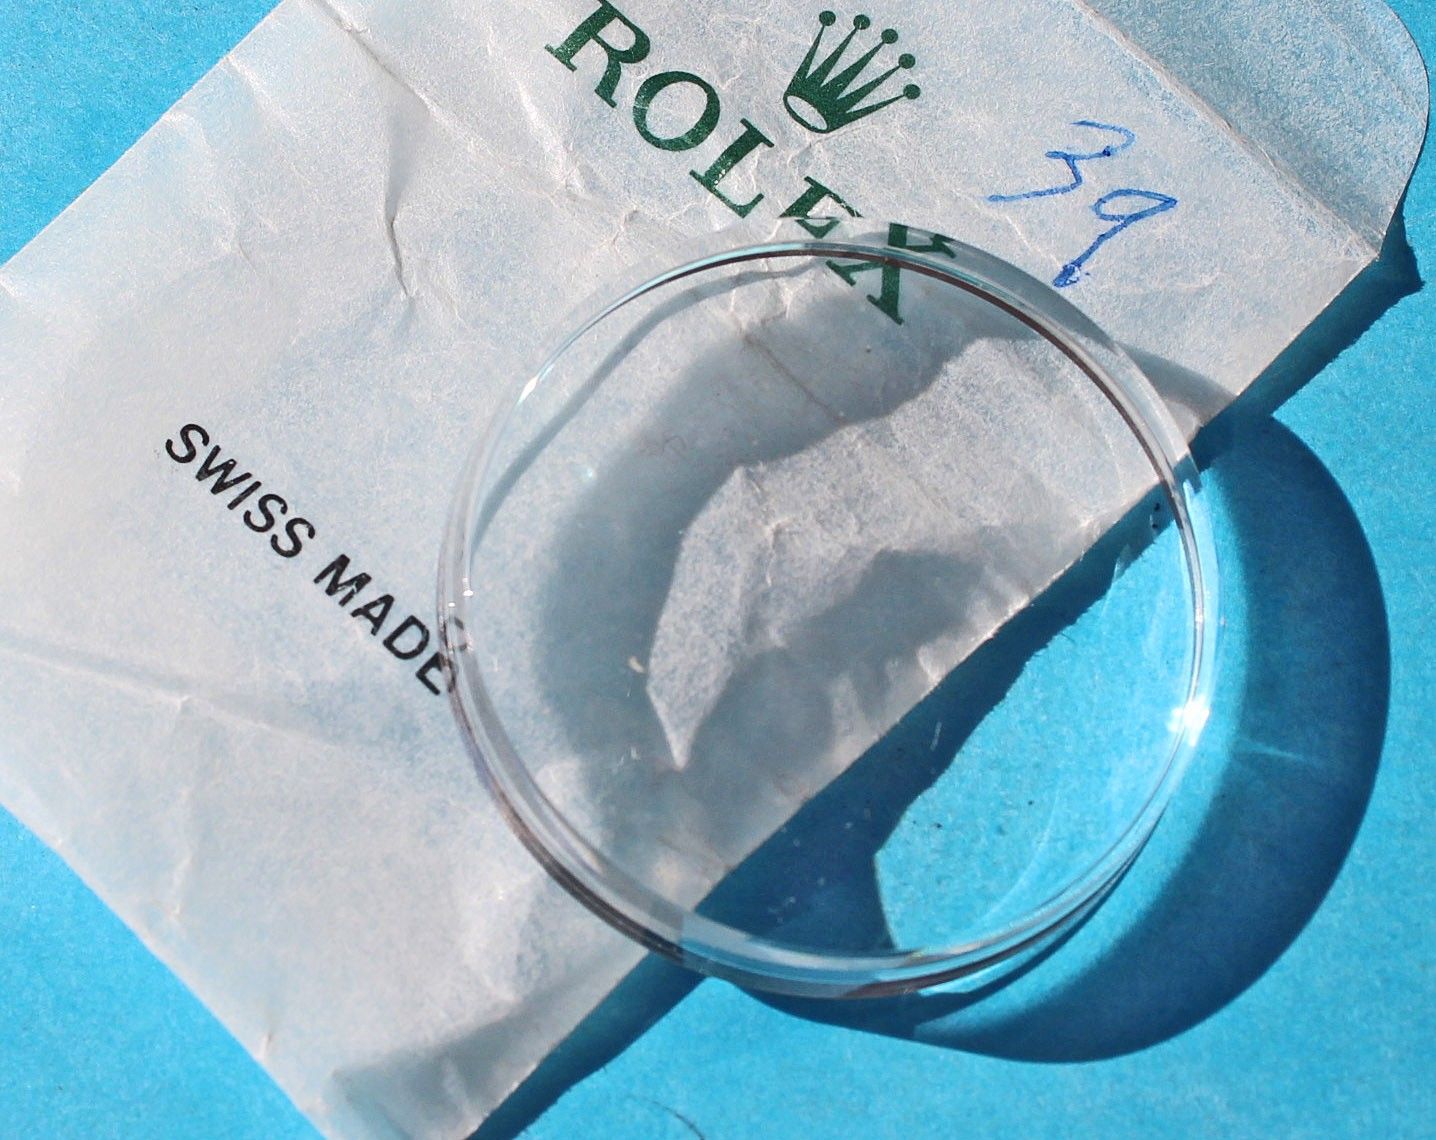 RARE ROLEX NEW CRISTAL TROPIC 39 DOMED SEA-DWELLER 1665, DRSD WATCHES SERVICE CRISTAL FROM RSC